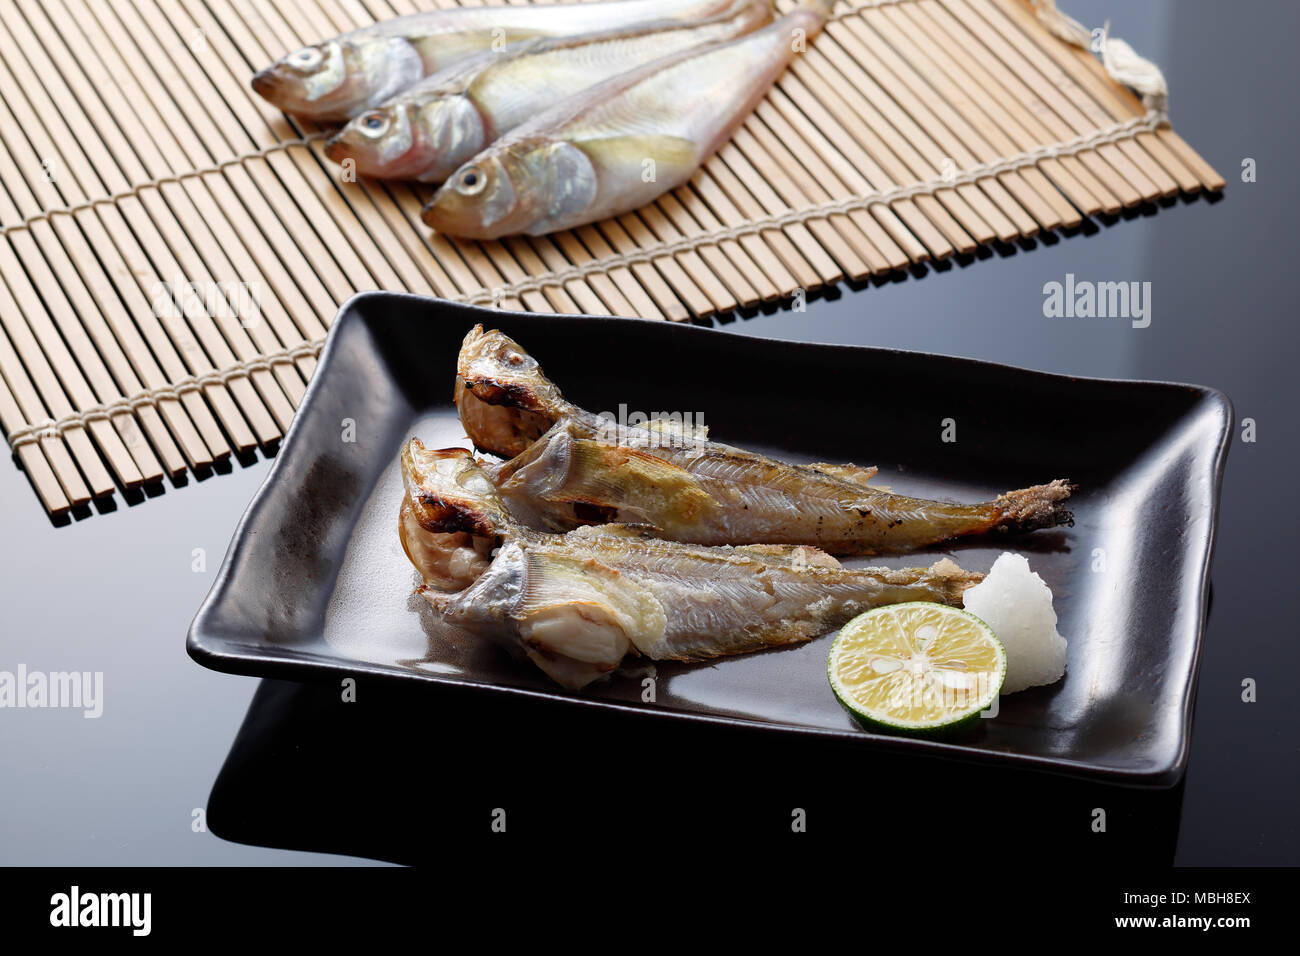 Japanese style grilled fish Stock Photo